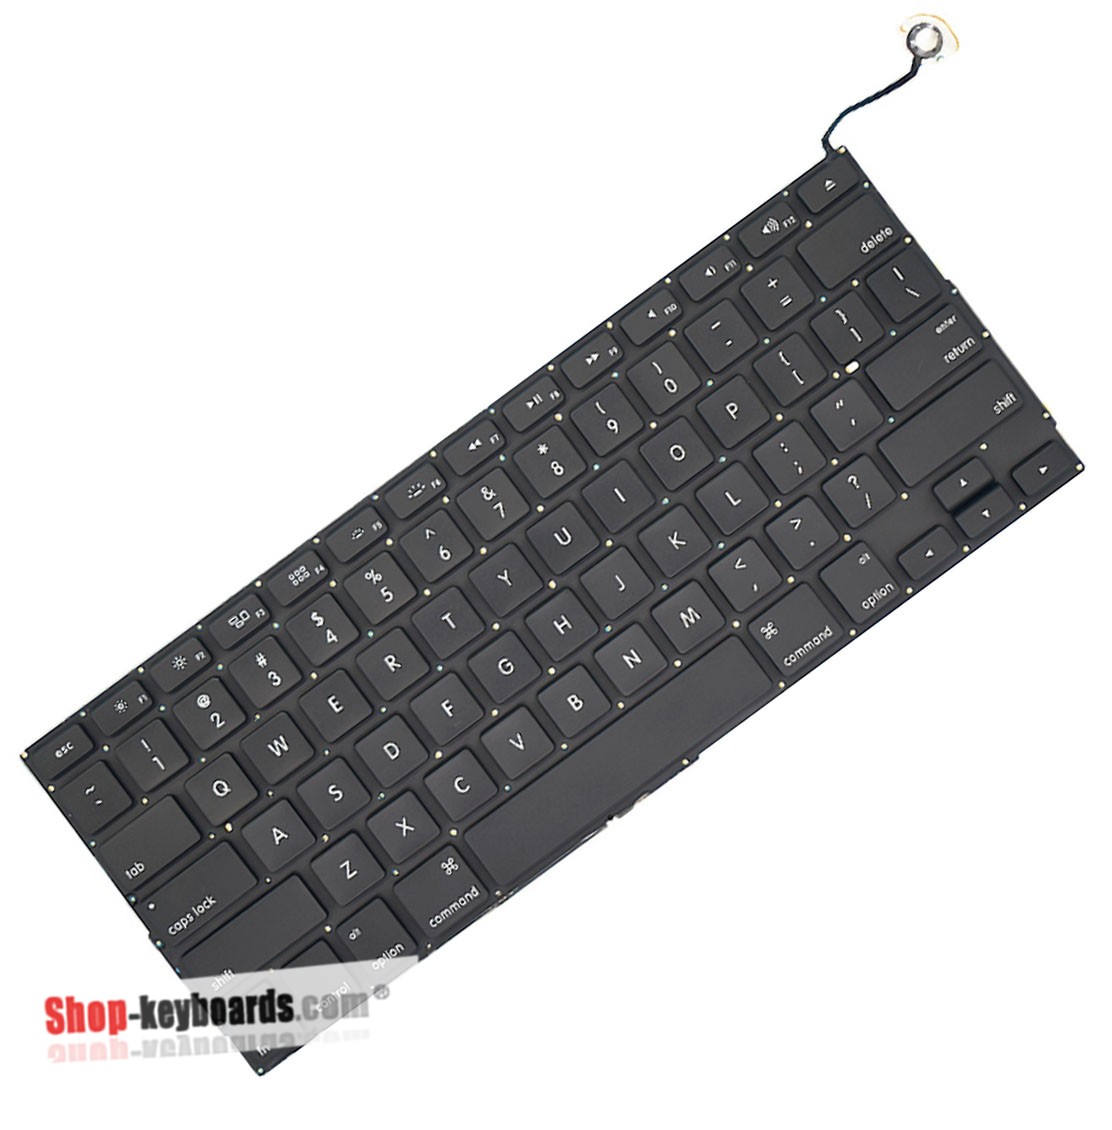 Apple MacBook Pro 15 inch MC371LL/A Keyboard replacement